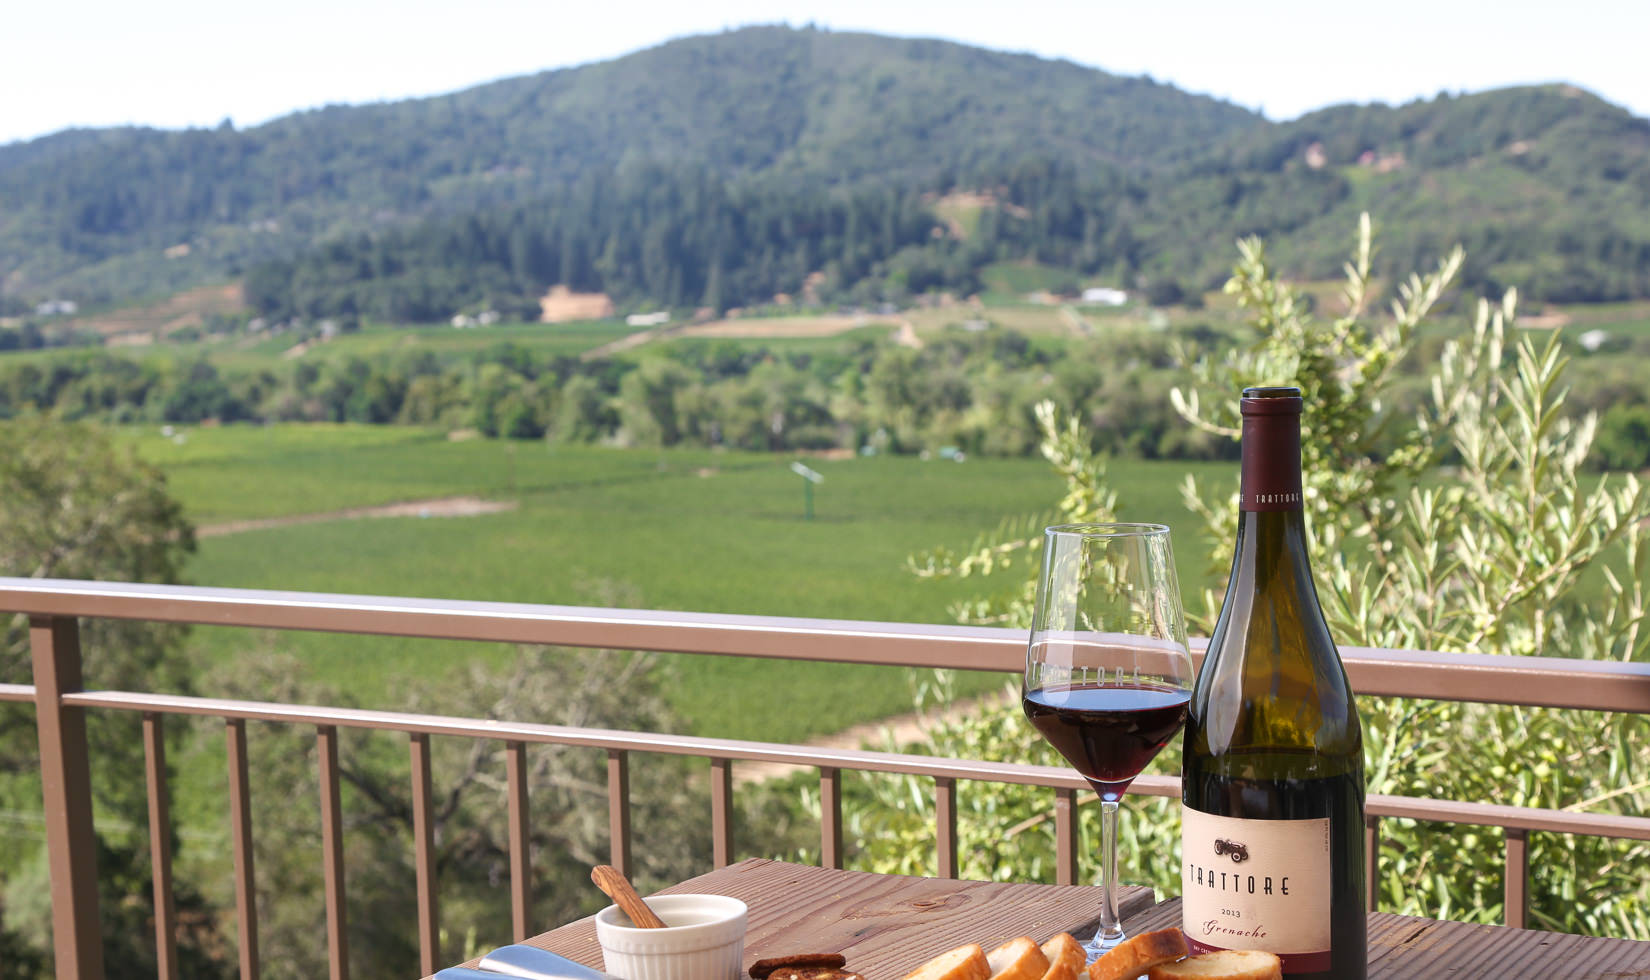 Winery with a view: Trattore Farms